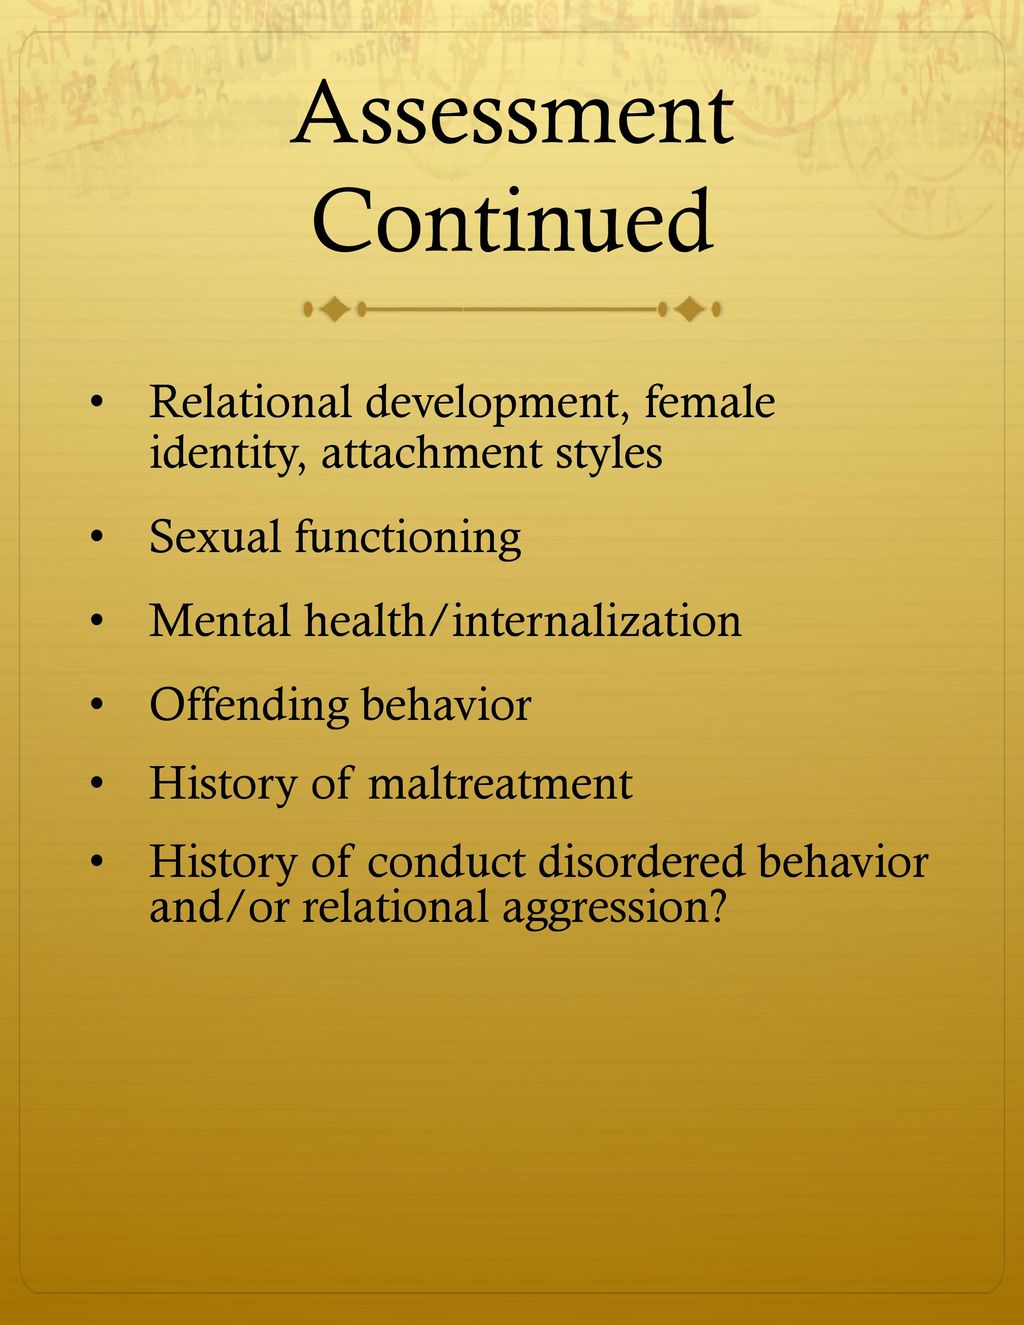 6/9/2018 Assessment Continued. Relational development, female identity, attachment styles. Sexual functioning.